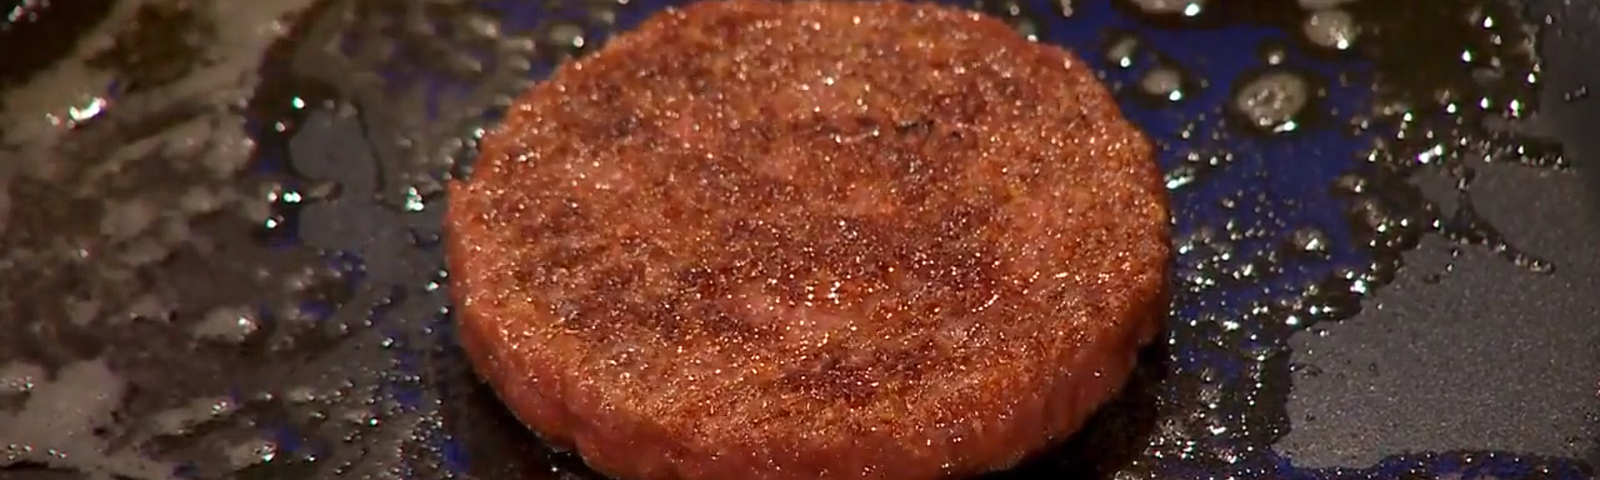 IMAGE: First cultured hamburger fried